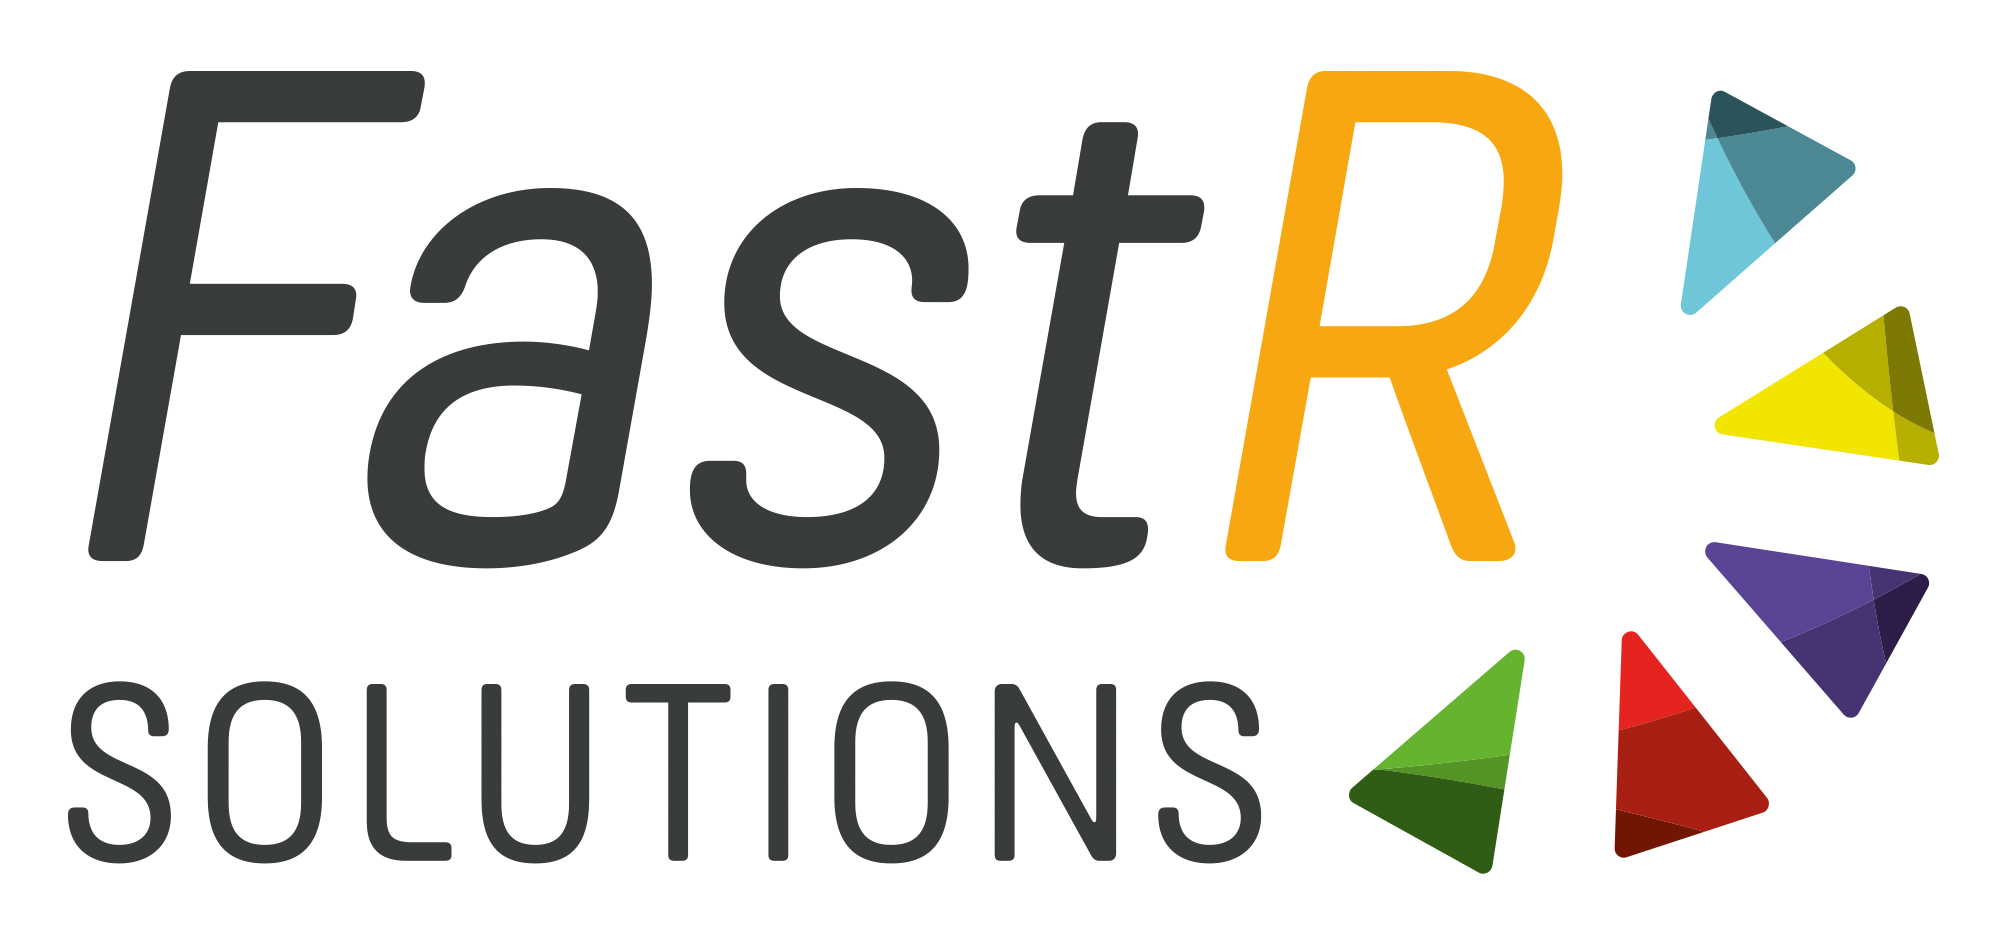 Fast R Solutions